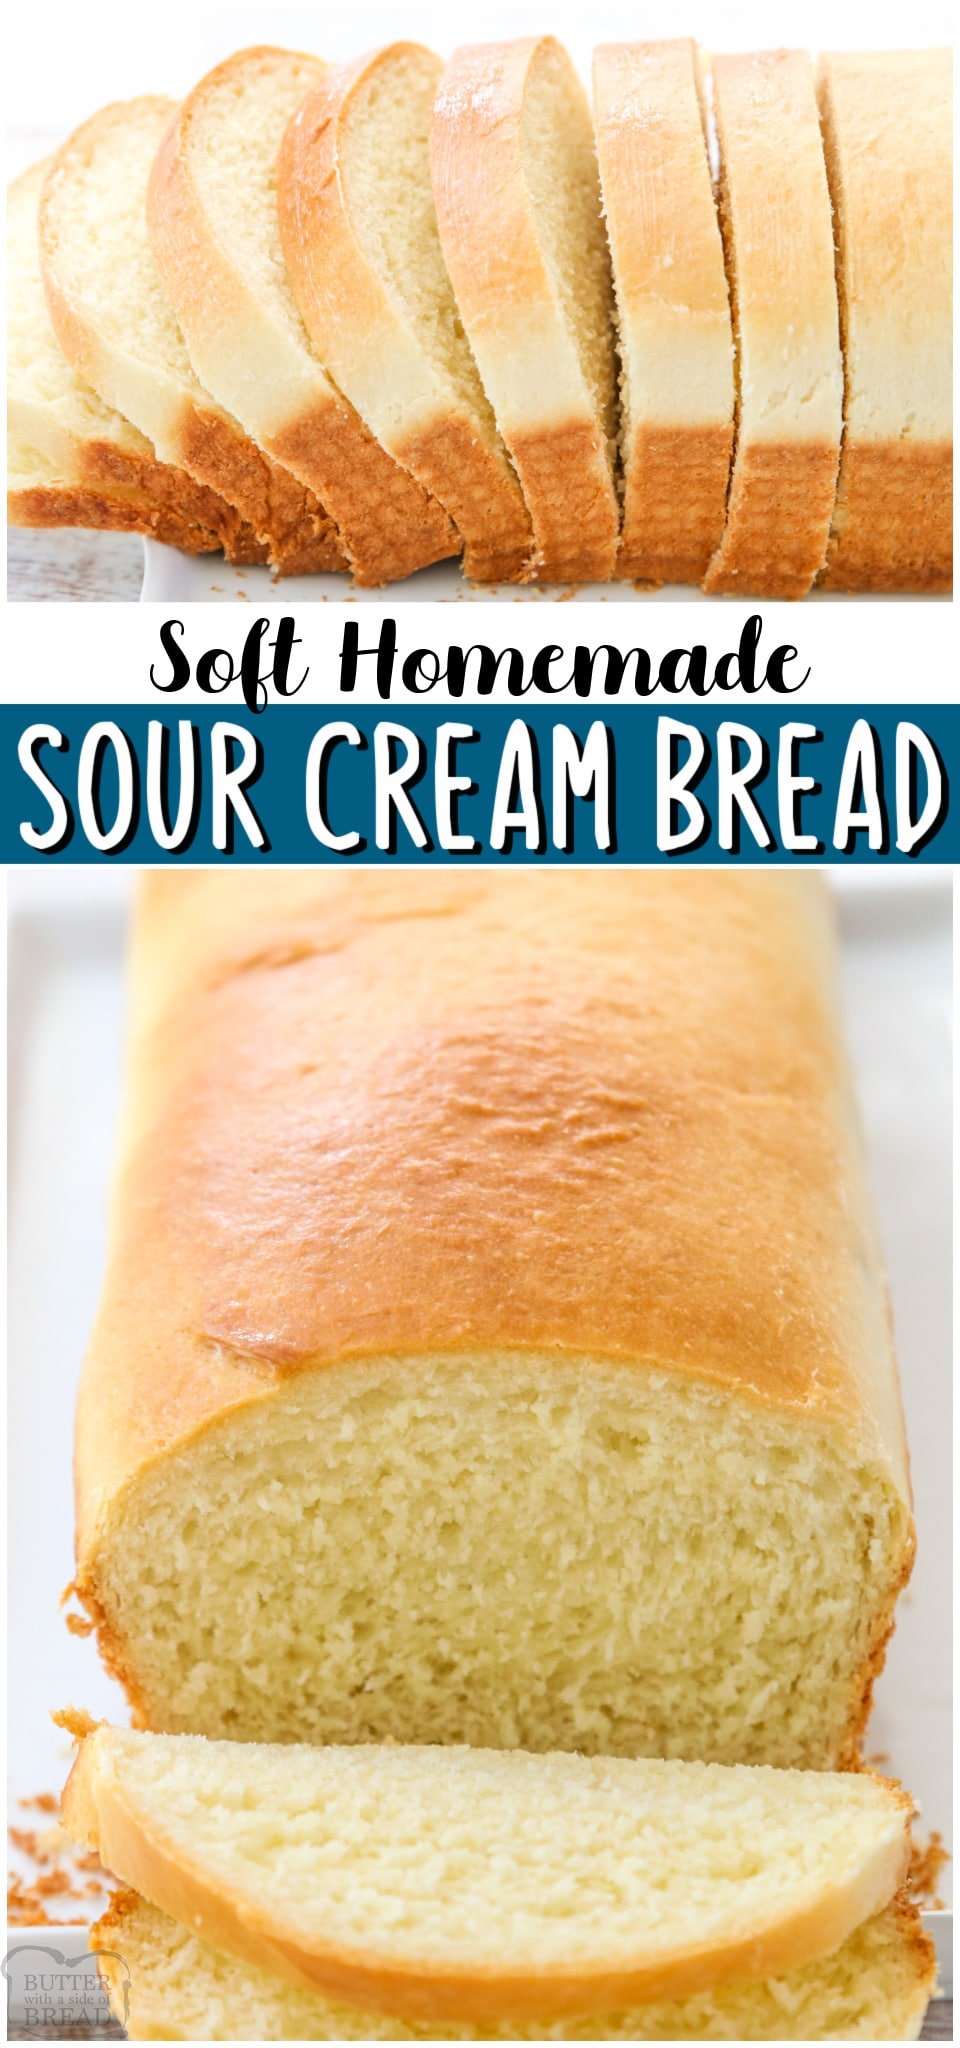 Sour Cream Bread made with flour, yeast, oil and egg, and sour cream of course! Soft, chewy white bread recipe with great flavor and delicious texture, perfect with butter & jam!